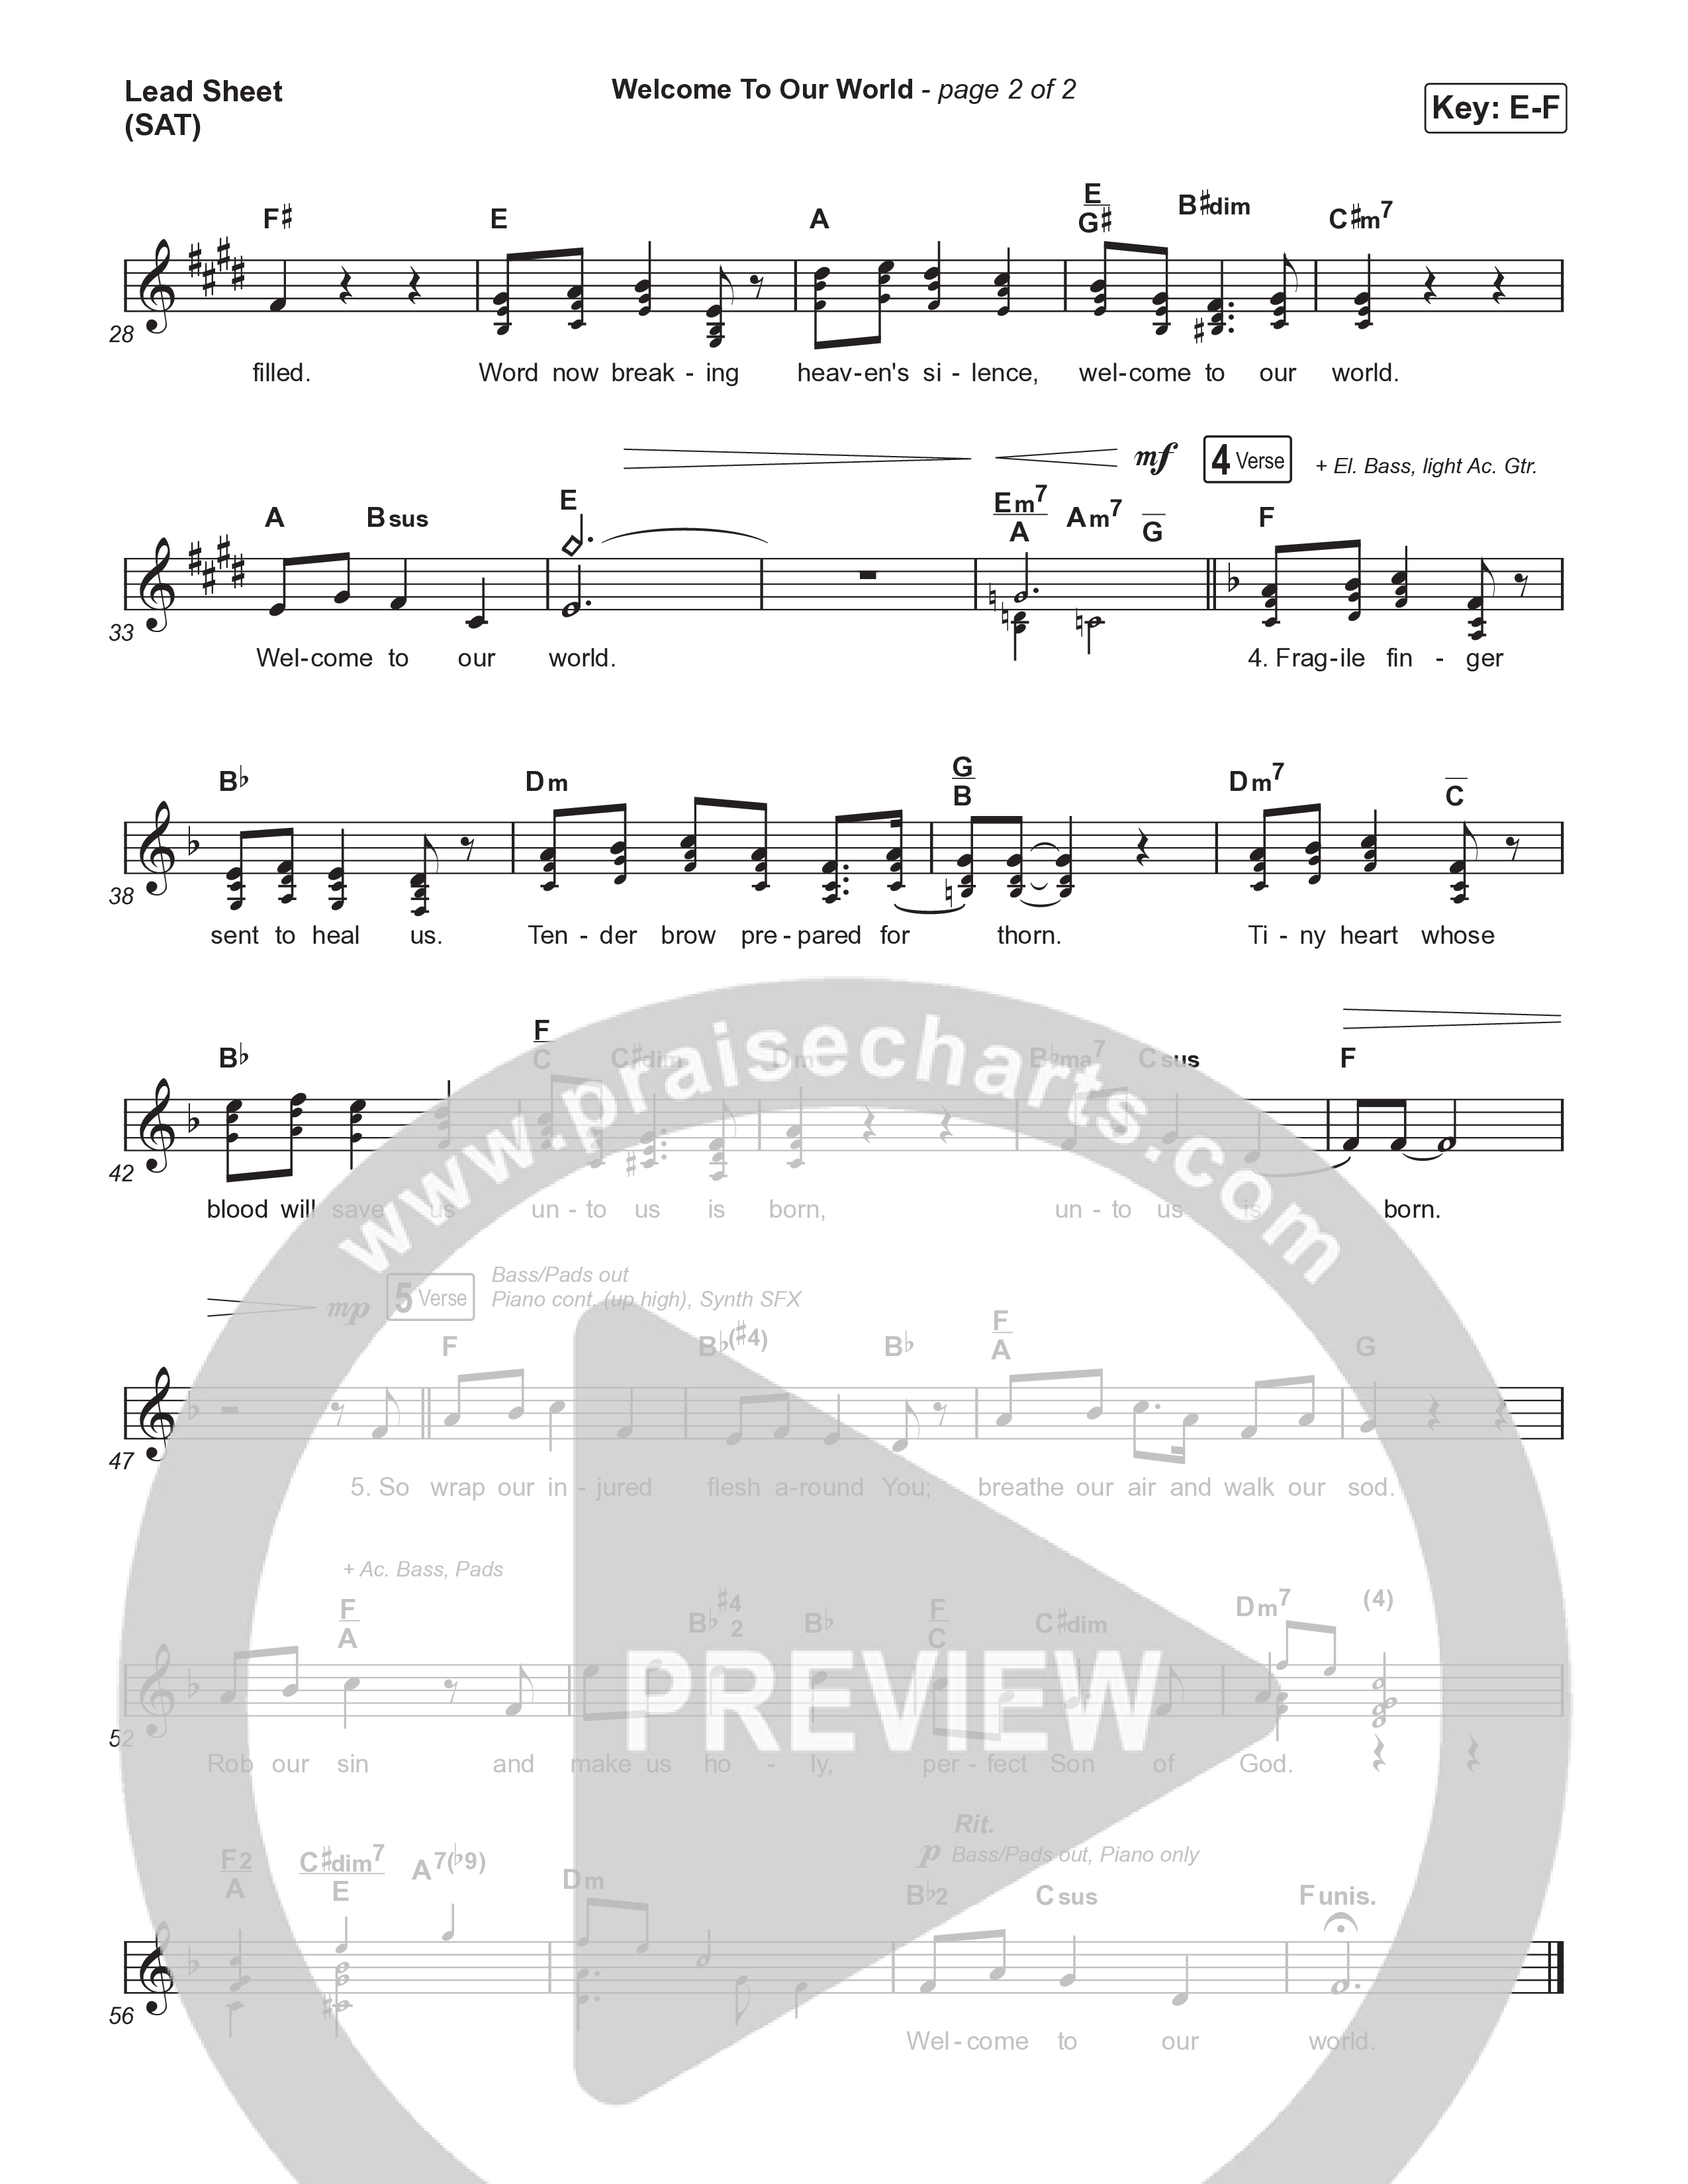 Welcome To Our World Lead Sheet (SAT) (Elevation Worship / Chris Brown)